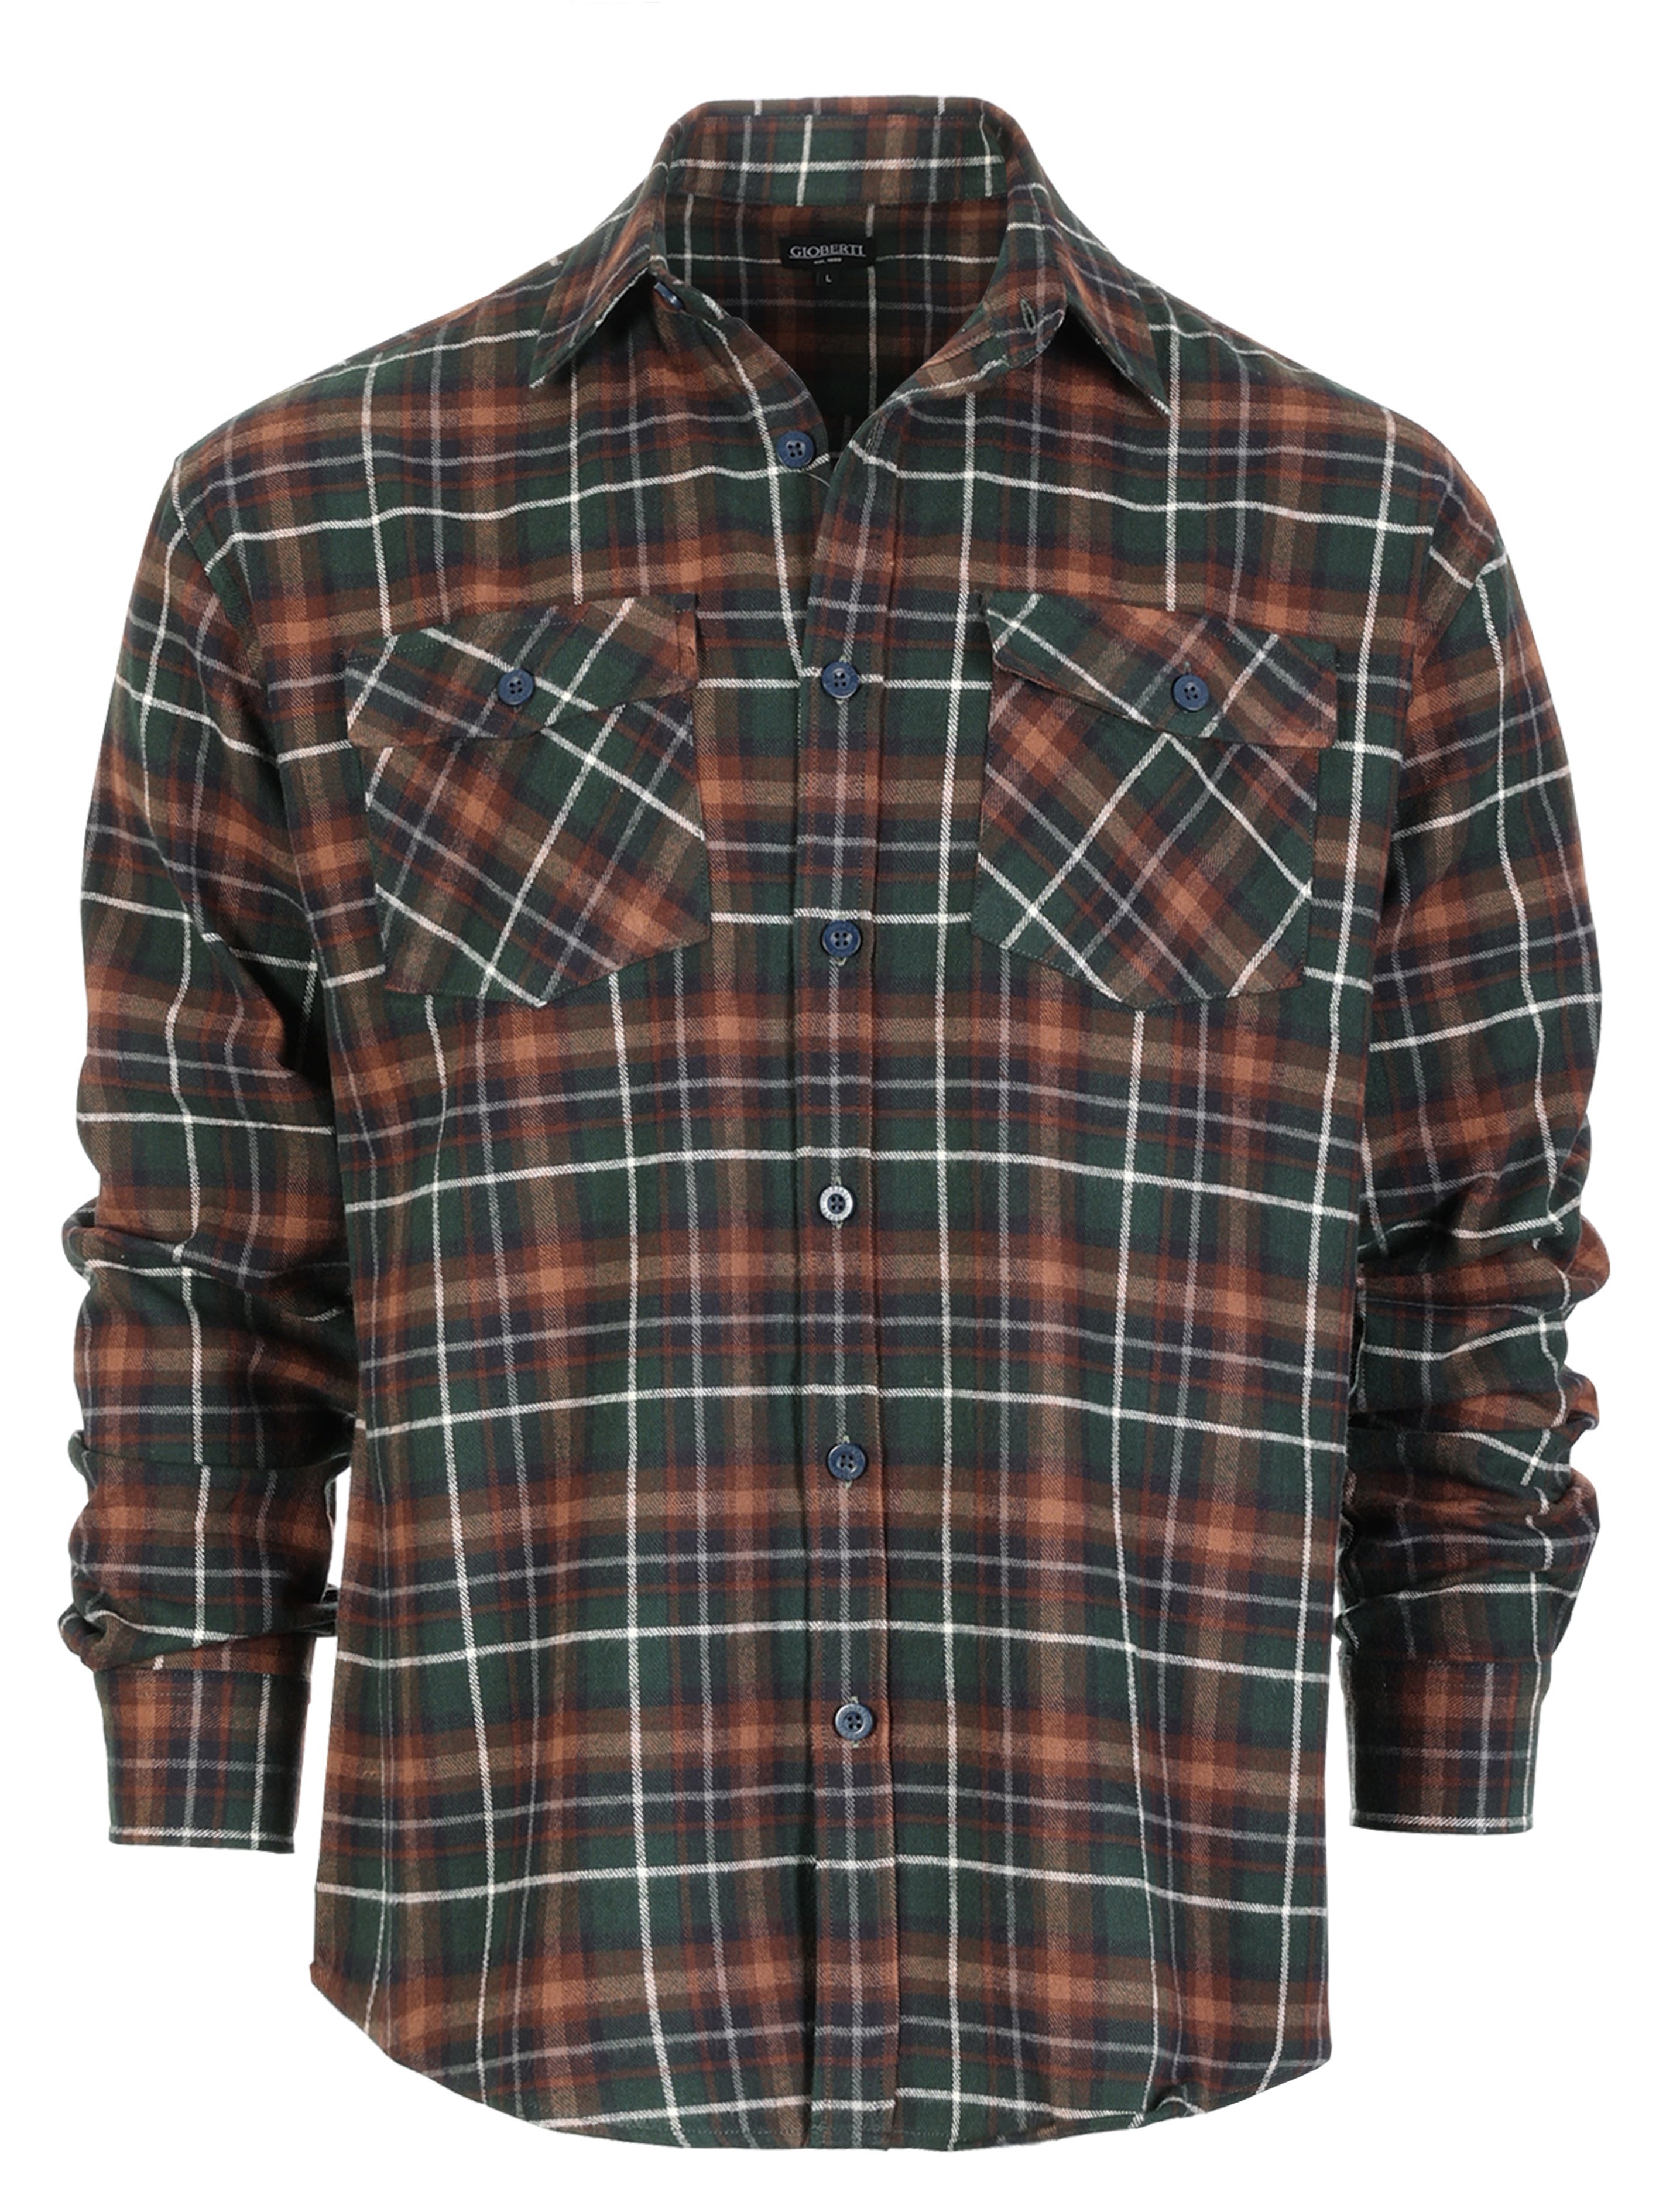 title:Gioberti Men's Green / Black / Ivory Highlight Plaid Checkered Brushed Flannel Shirt;color:Green / Black / Ivory Highlight